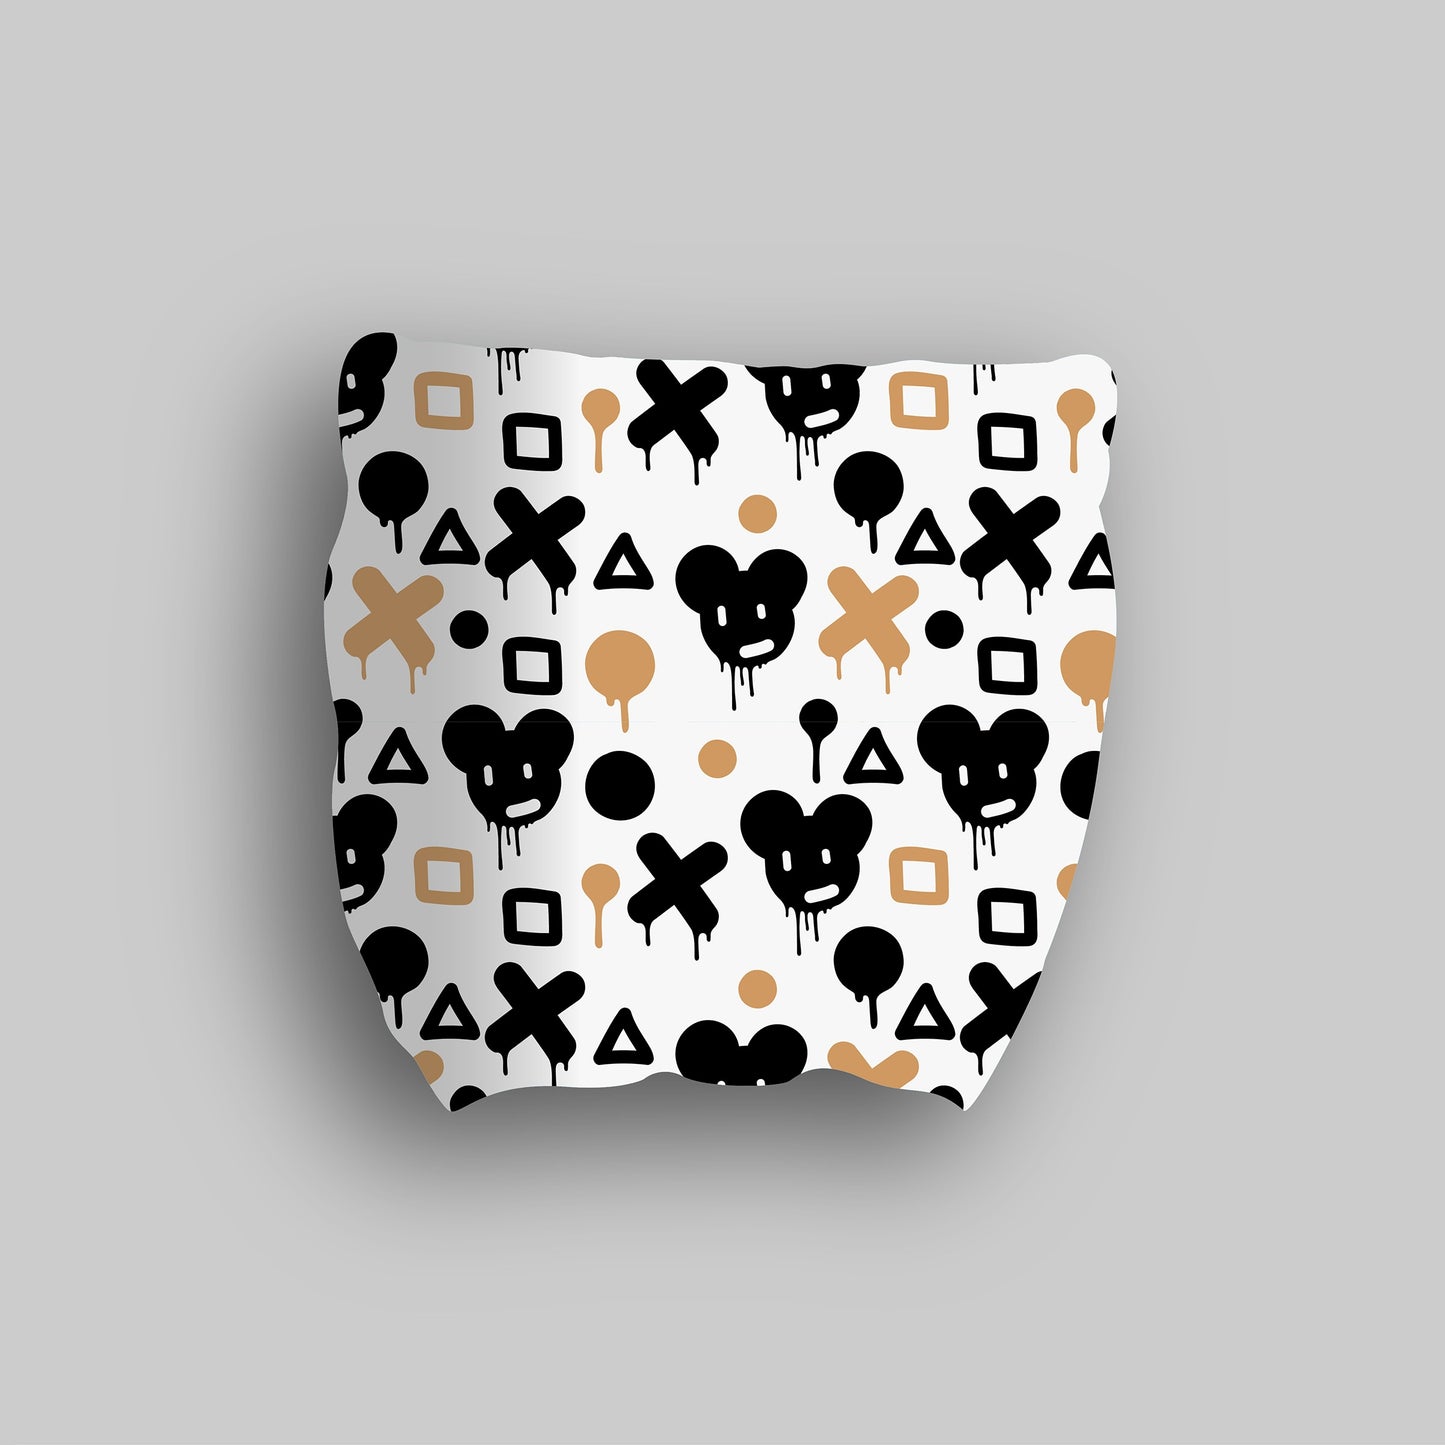 XO Mouse Putter Cover